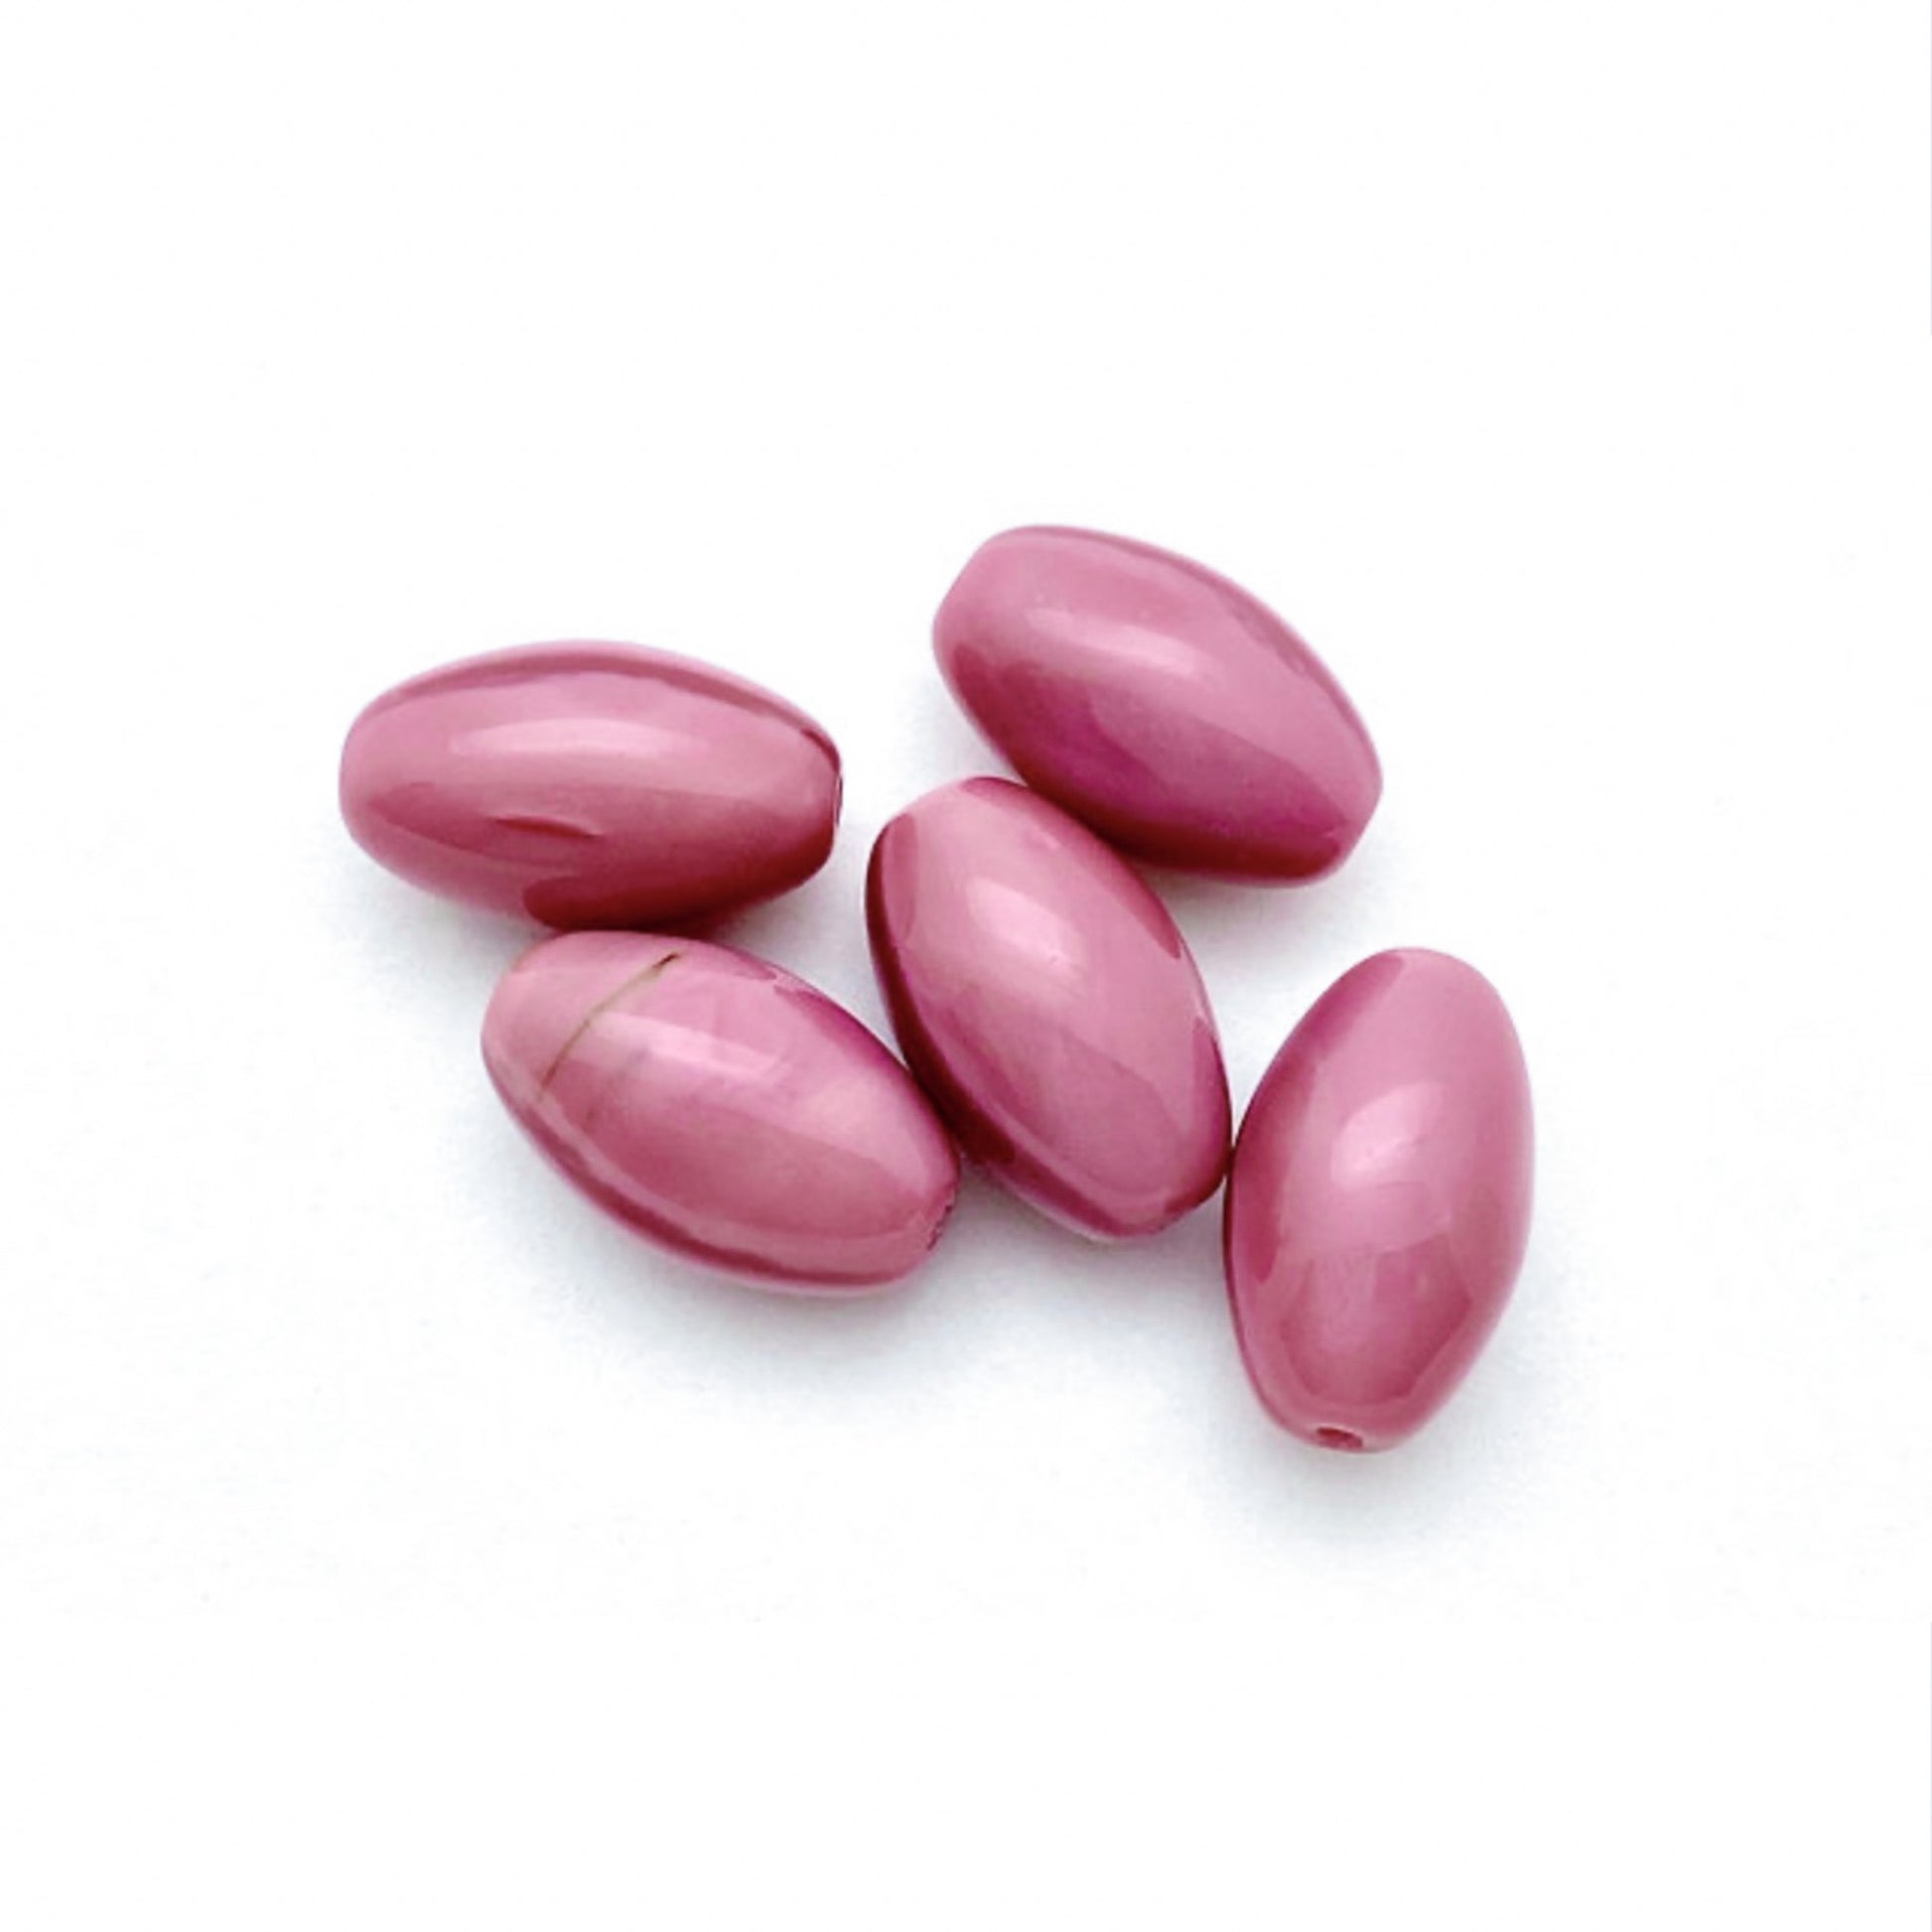 Olive Opaque Pink Pressed Czech 18mm x 11mm Glass Bead - 8 pcs.-The Bead Gallery Honolulu